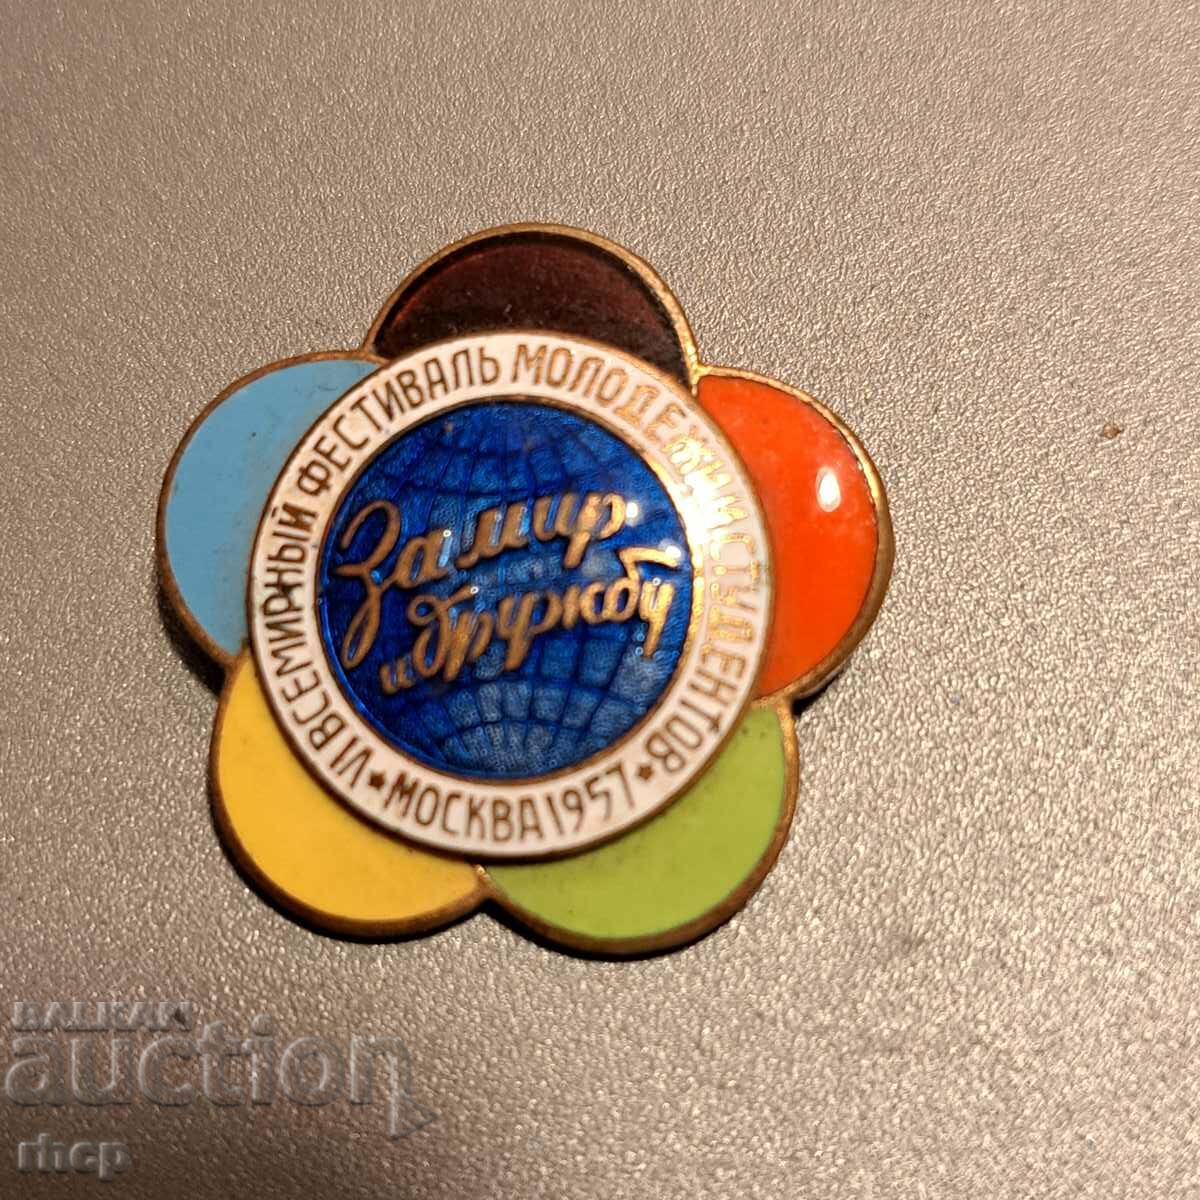 1958 Youth Festival Moscow old enamel badge